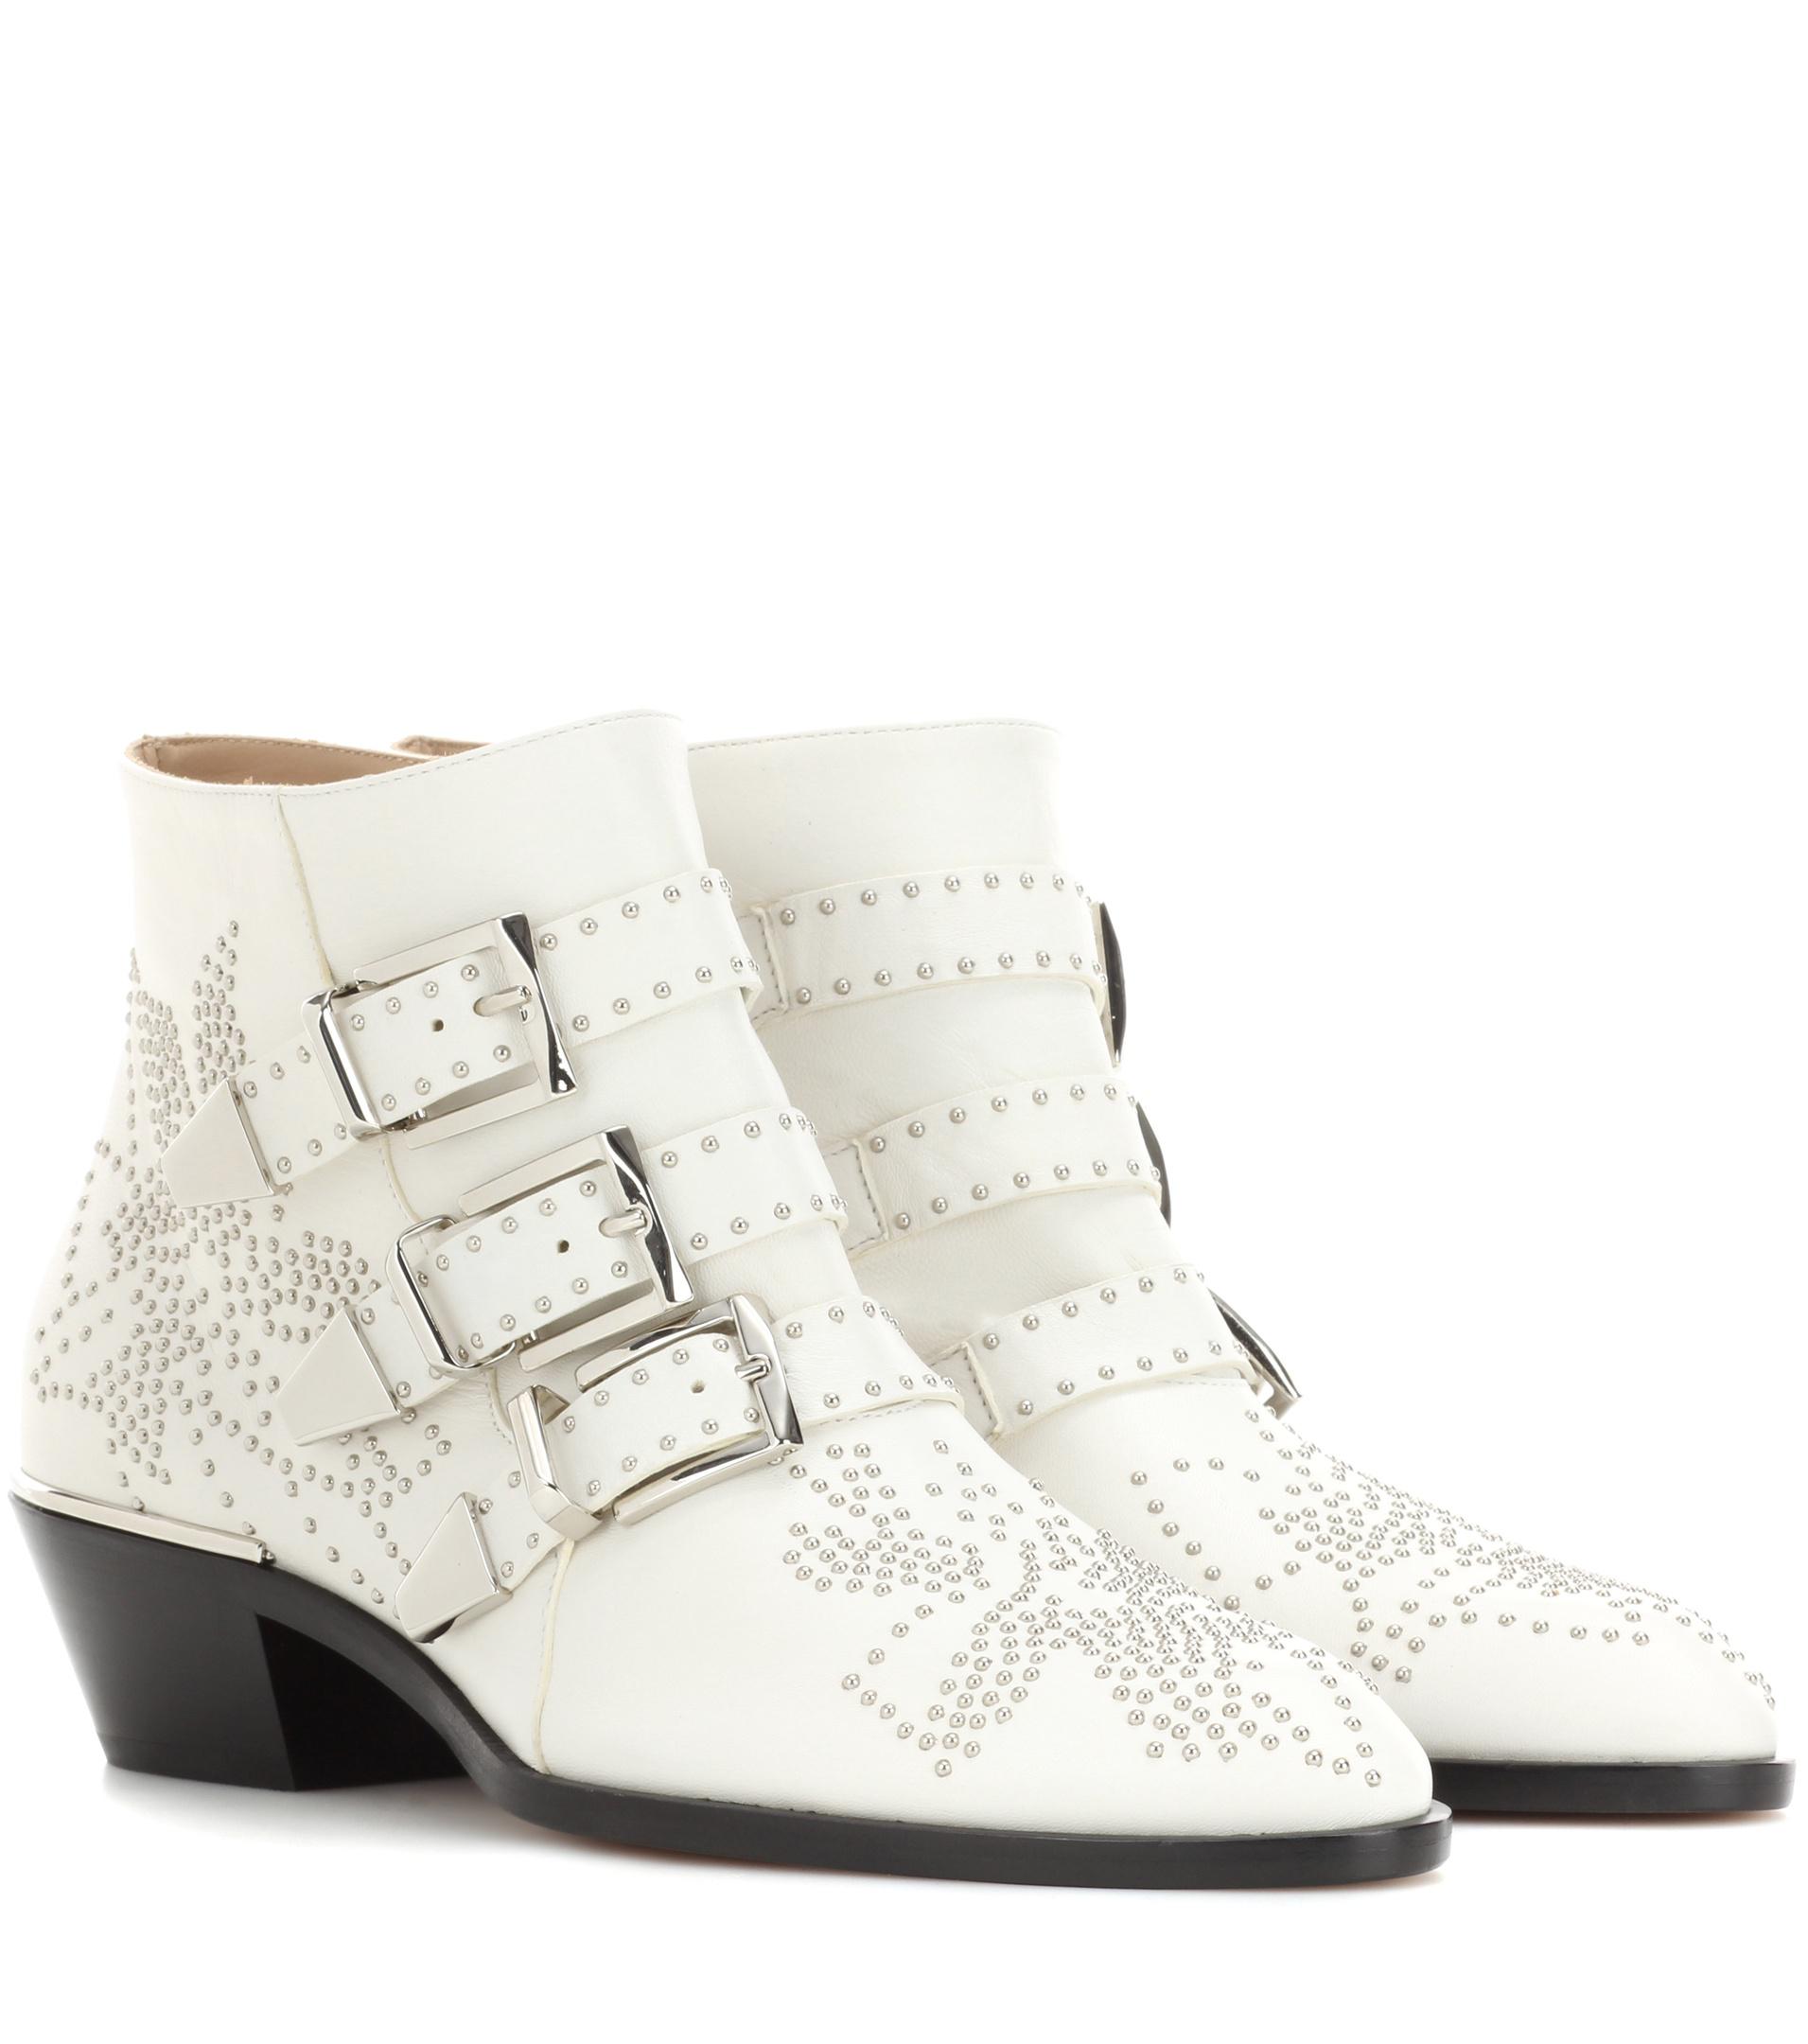 Chloé Susanna Studded Leather Ankle Boots in White - Lyst